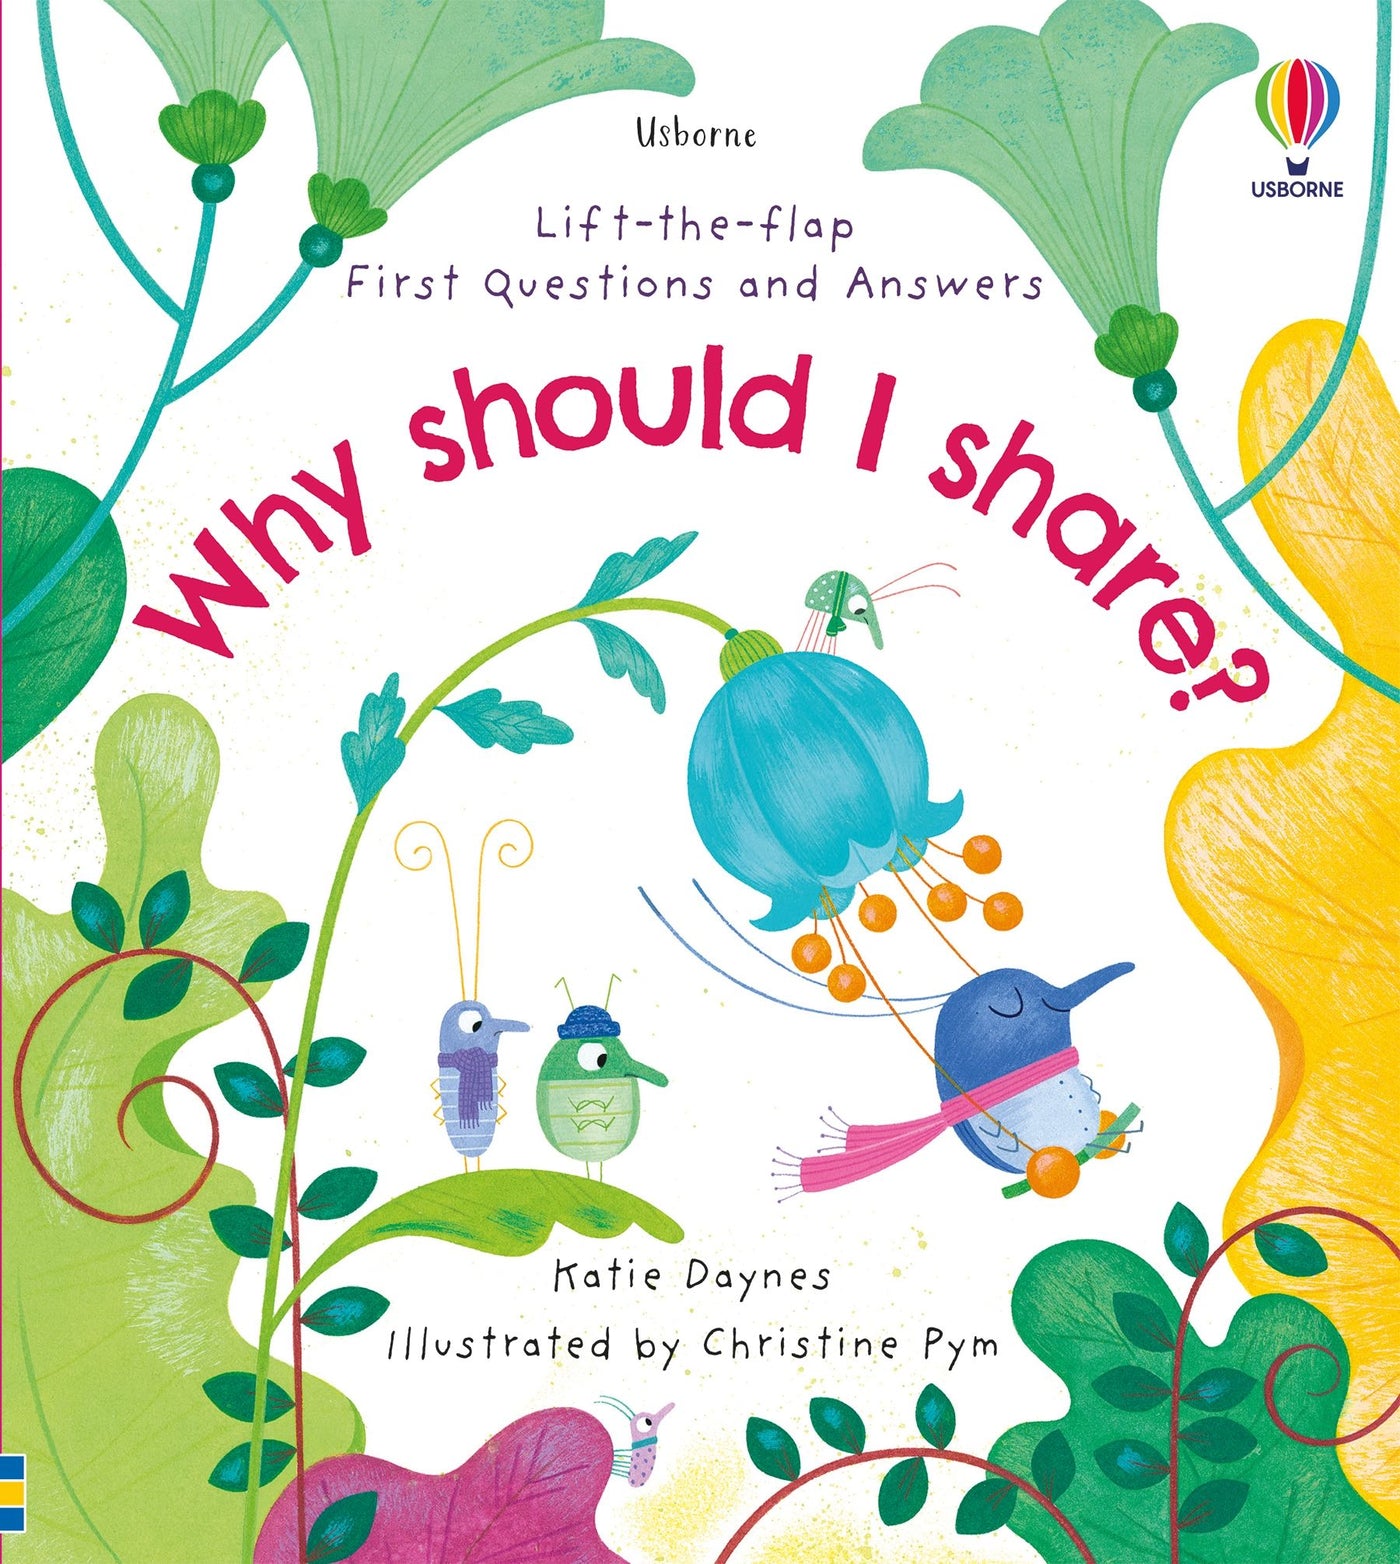 First Questions and Answers: Why should I share? - Board Book | Usborne